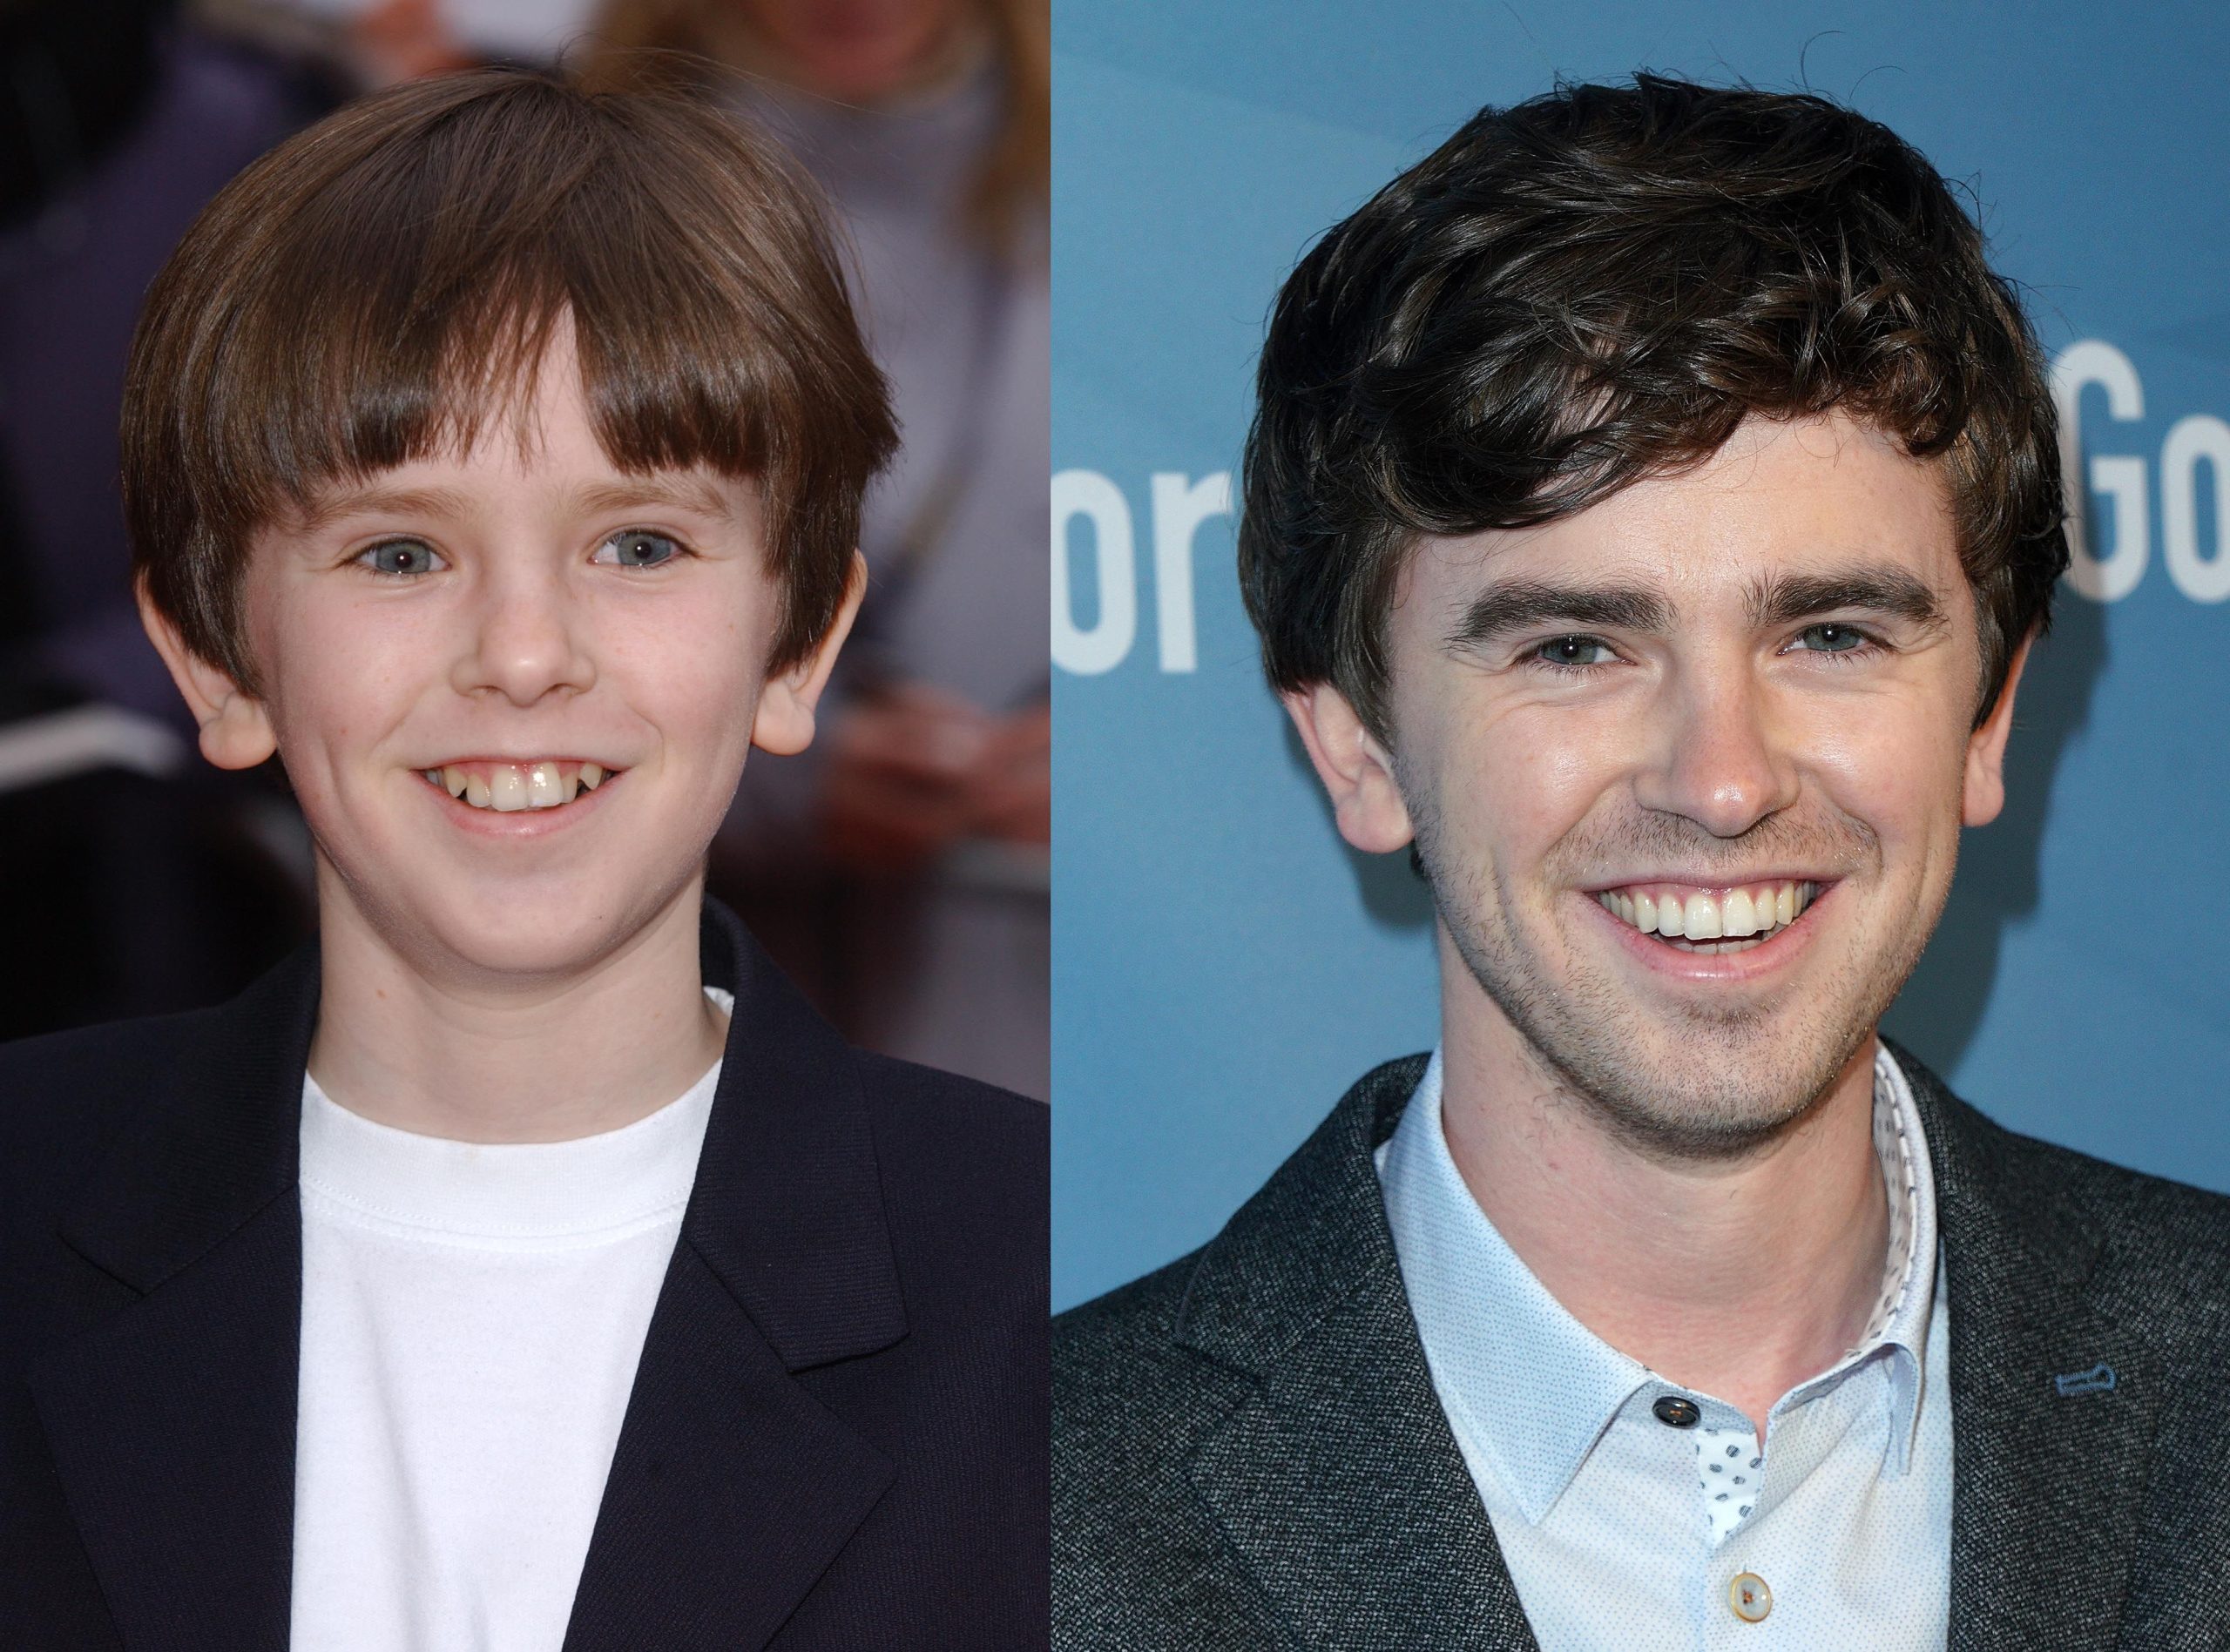 Freddie Highmore Wiki, Bio, Age, Net Worth, and Other Facts